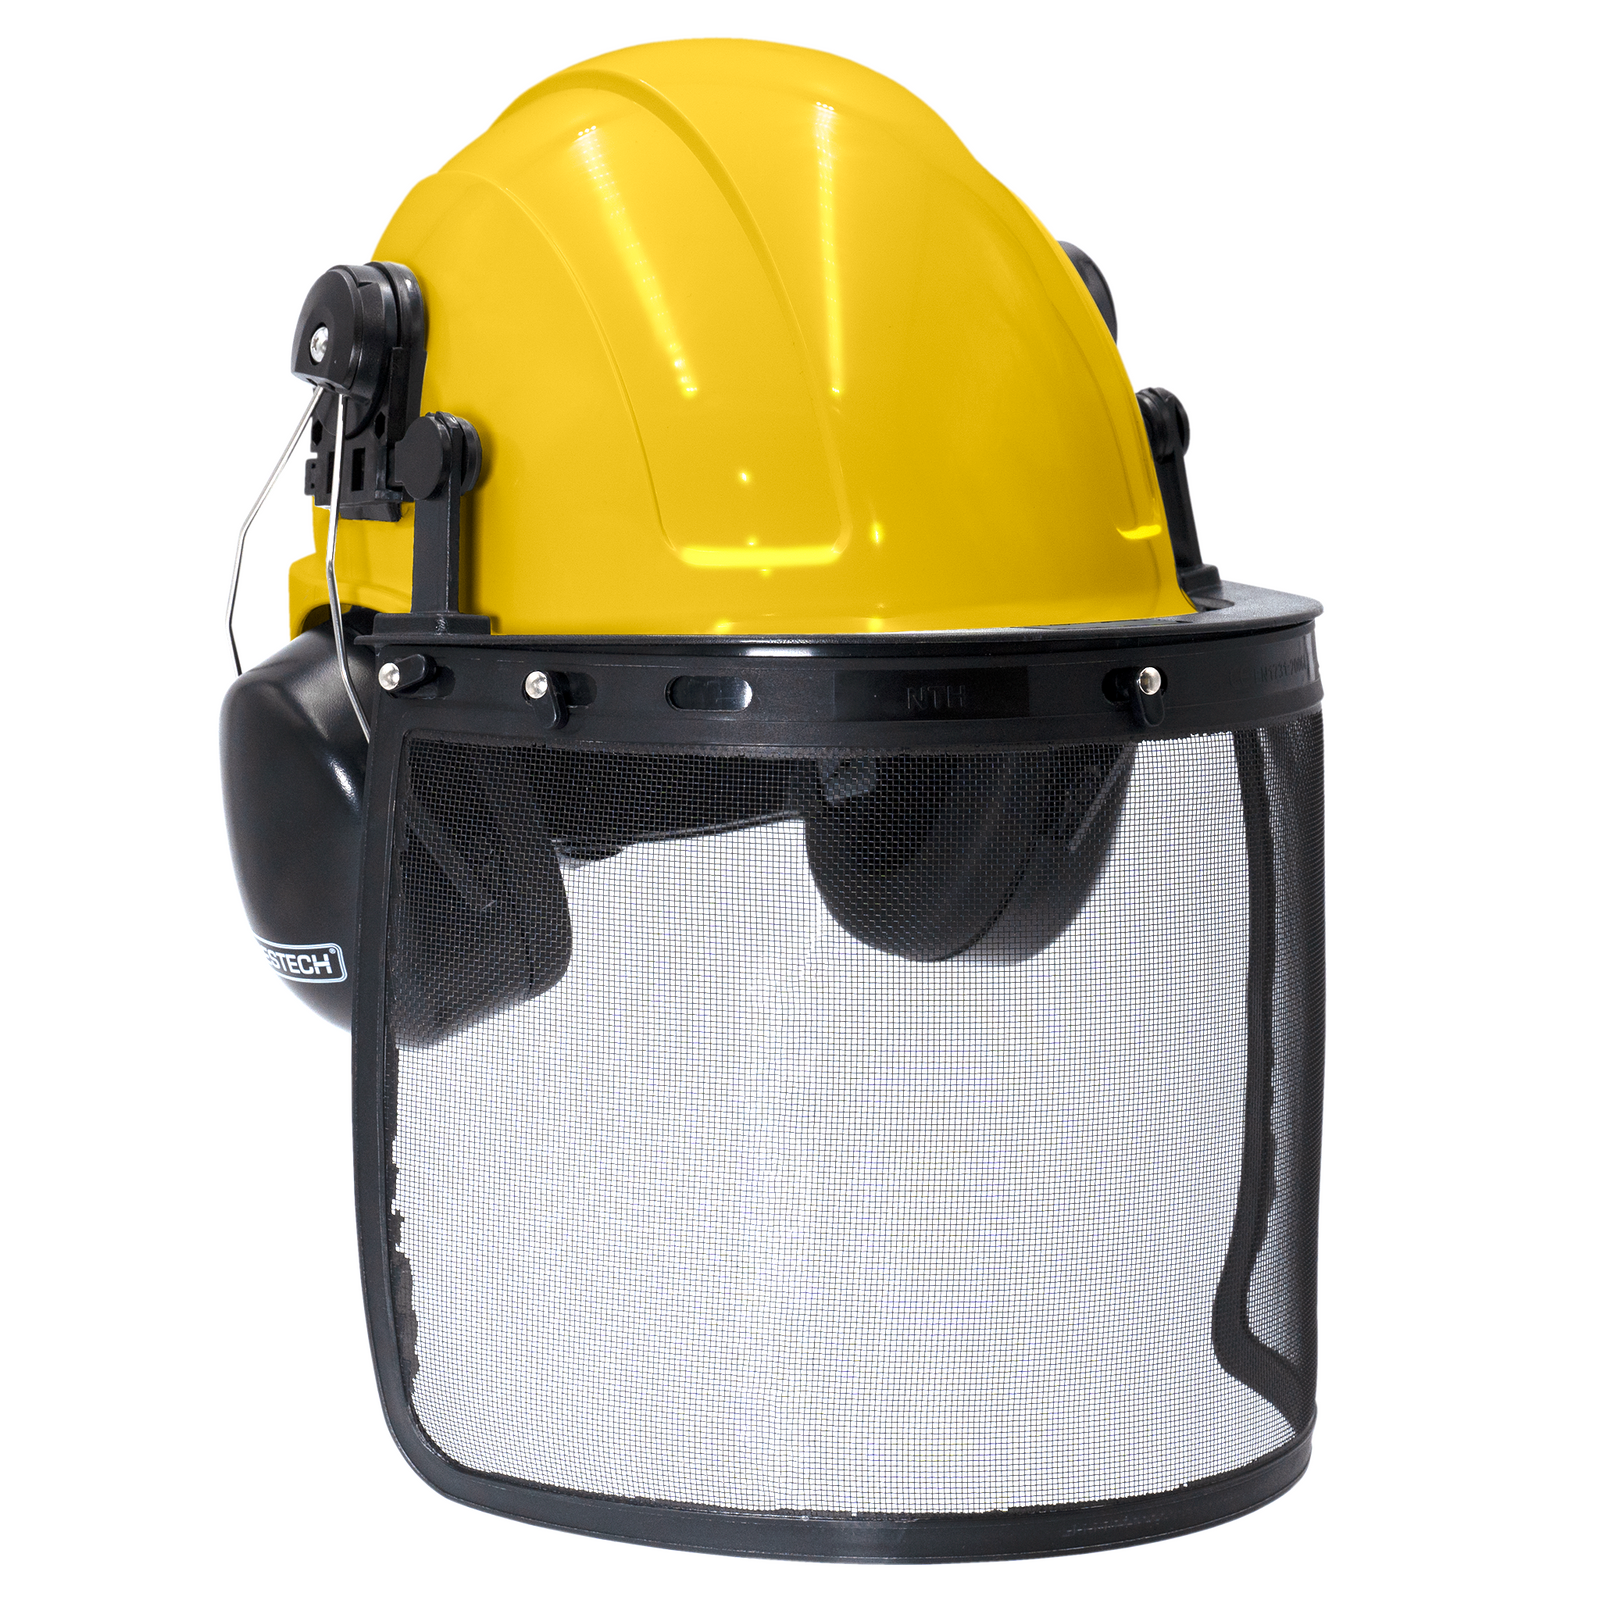 Yellow safety cap style helmet with iron mesh face shield and earmuffs for hearing protection